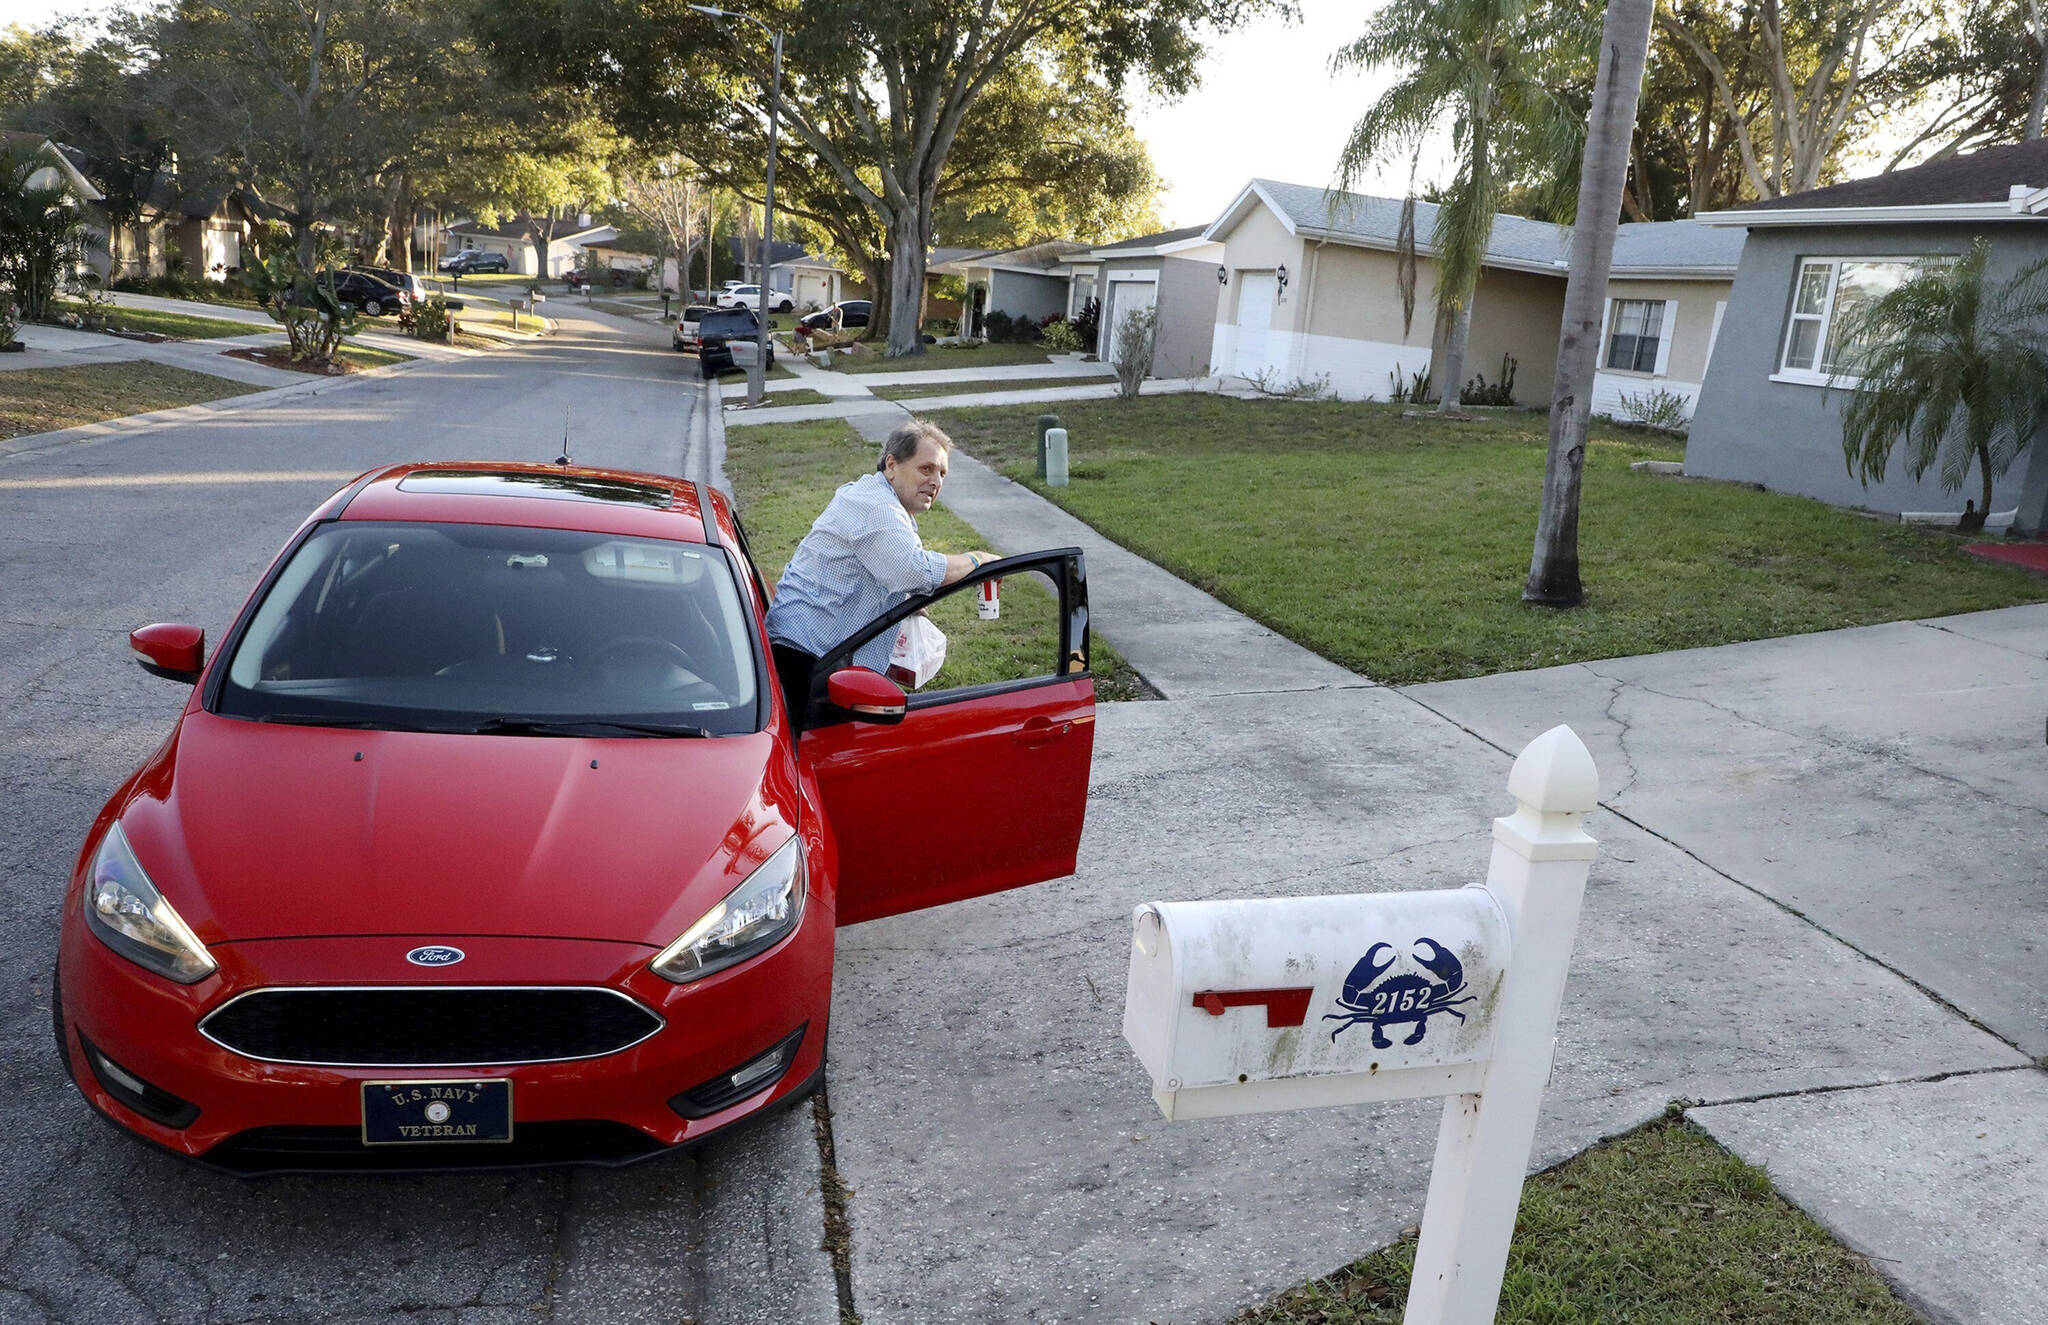 Nevin Overmiller, 78, walks a KFC food delivery to a customer’s door while delivering for Uber Eats, Wednesday, Jan 5, 2021, in Palm Harbor, Fla. Attacks which occurred in Florida last month sent ripples of fear among some app-based drivers, who have long demanded better protection from companies whose safety policies they say are bettered geared toward customers than workers. (Douglas R. Clifford / Tampa Bay Times)